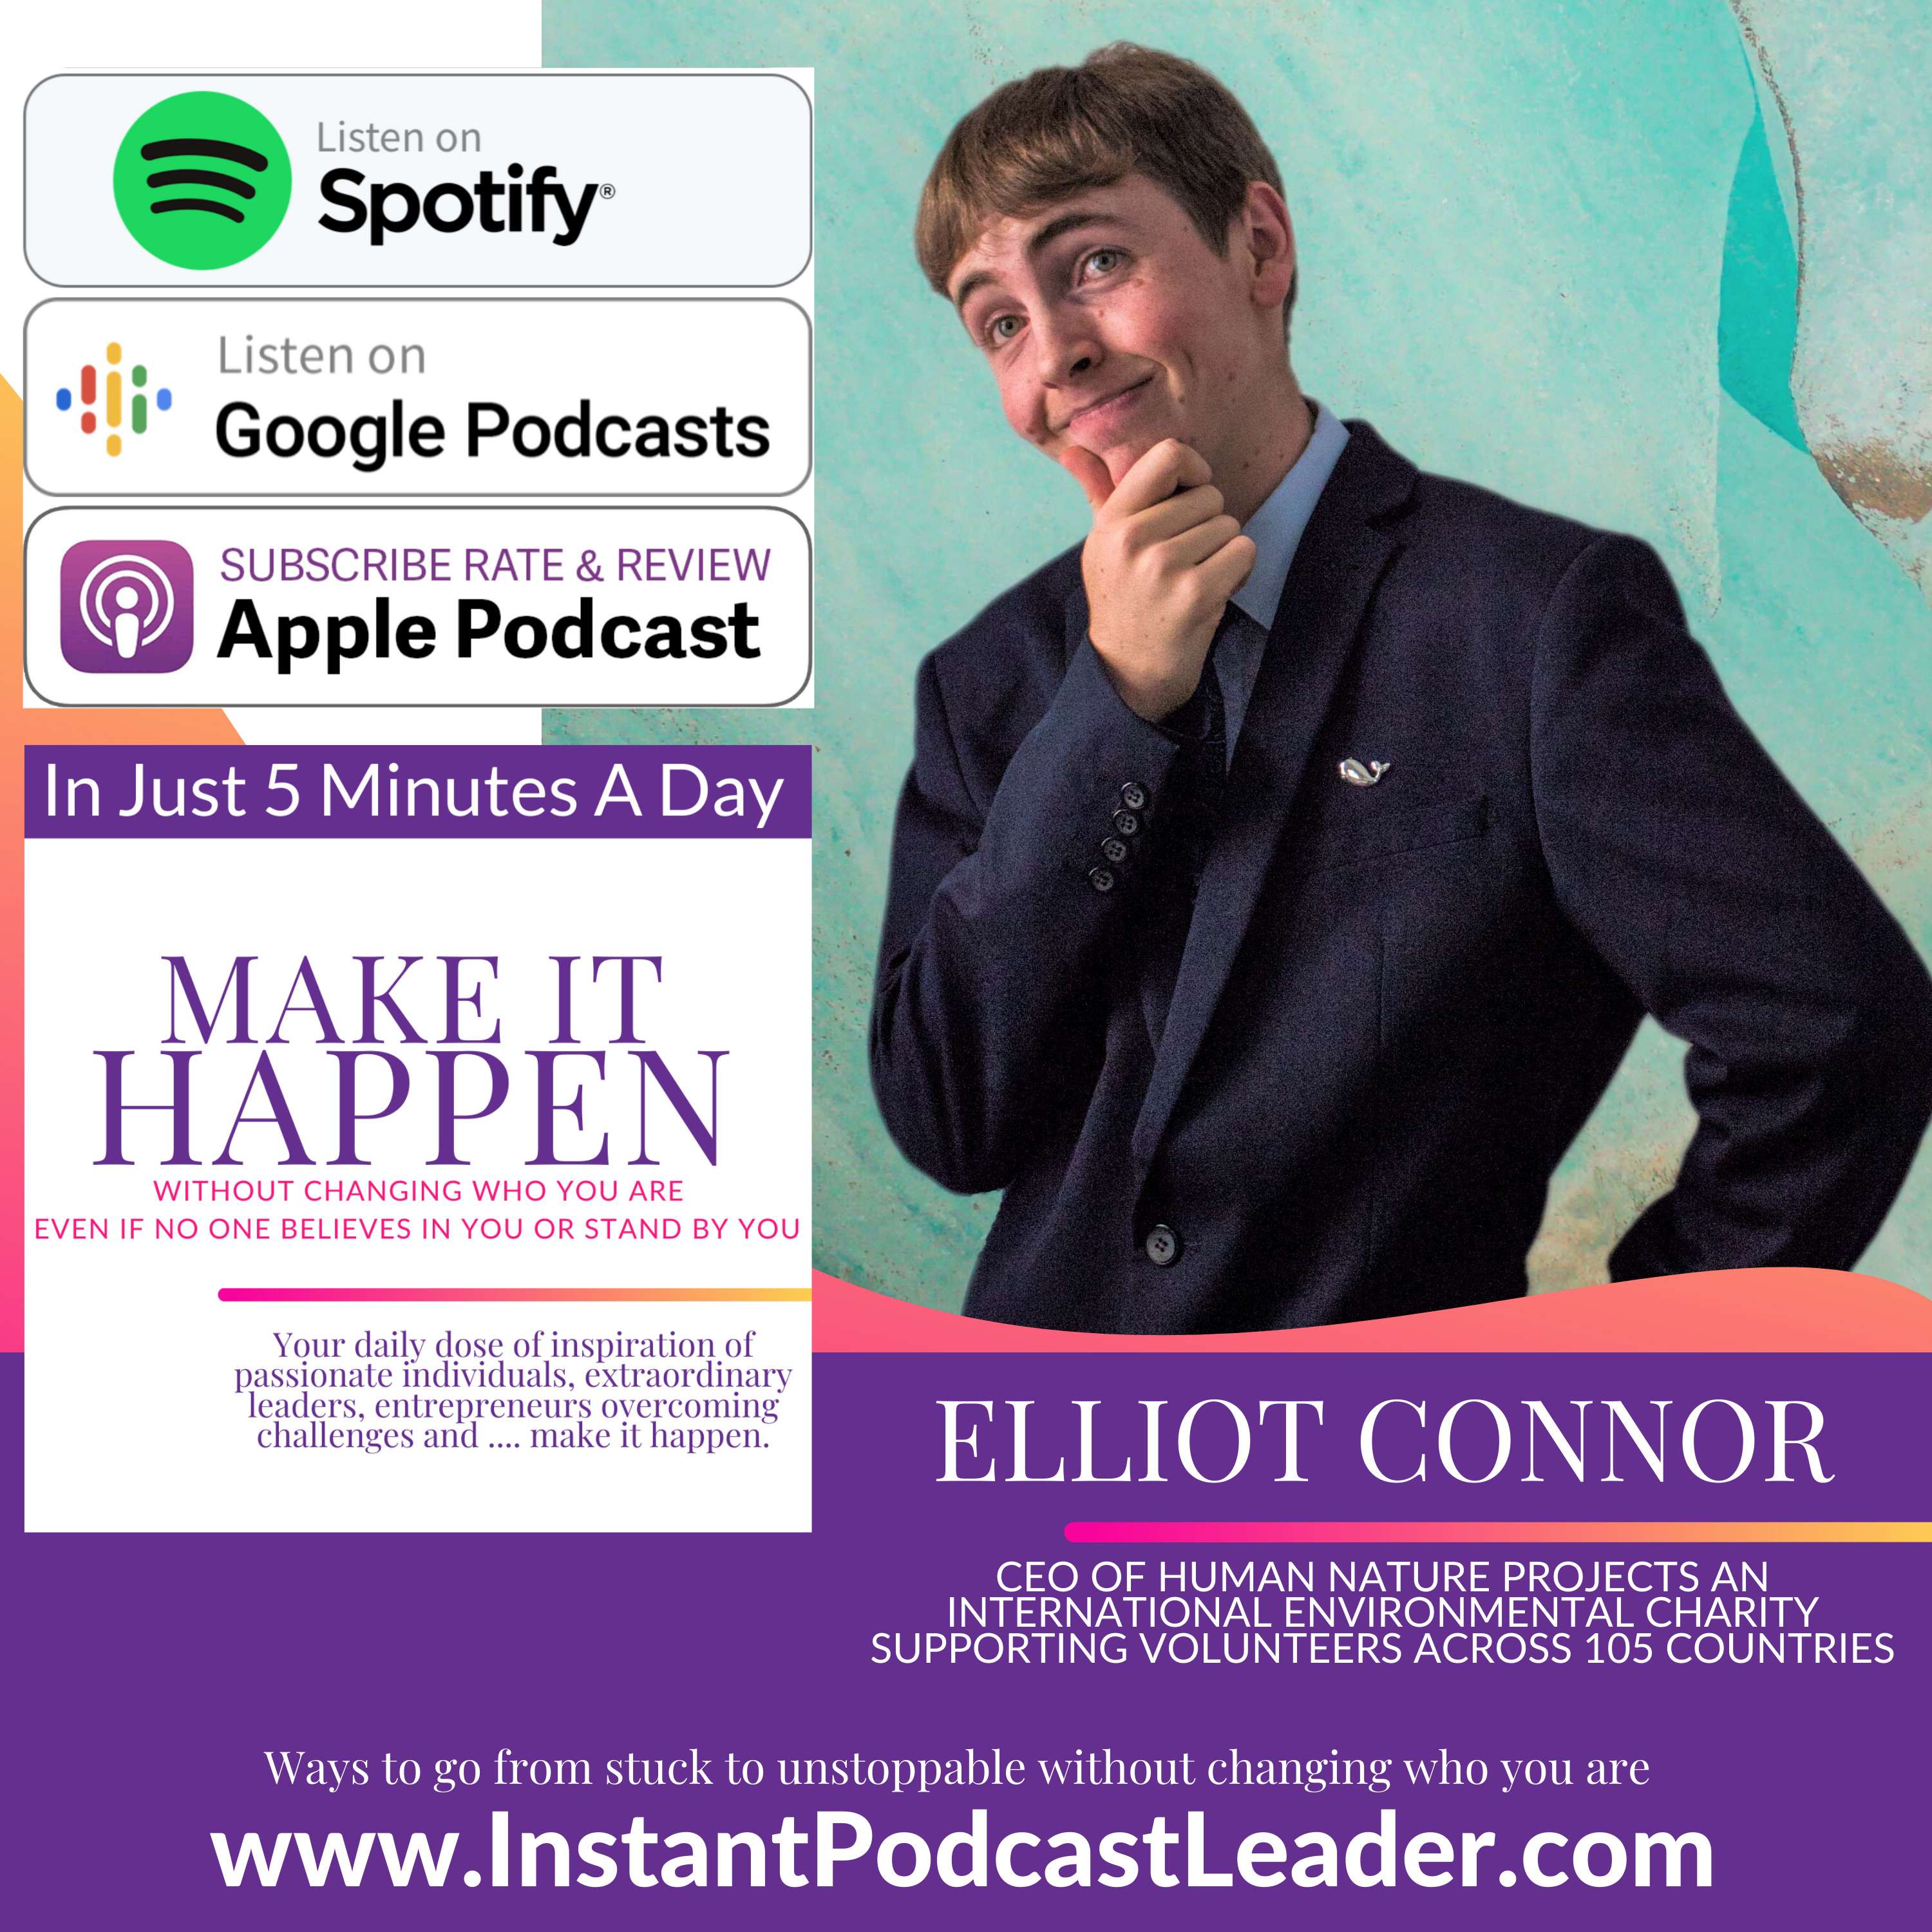 MIH EP43 Elliot Connor CEO of Human Nature Projects an international environmental charity supporting volunteers across 105 countries